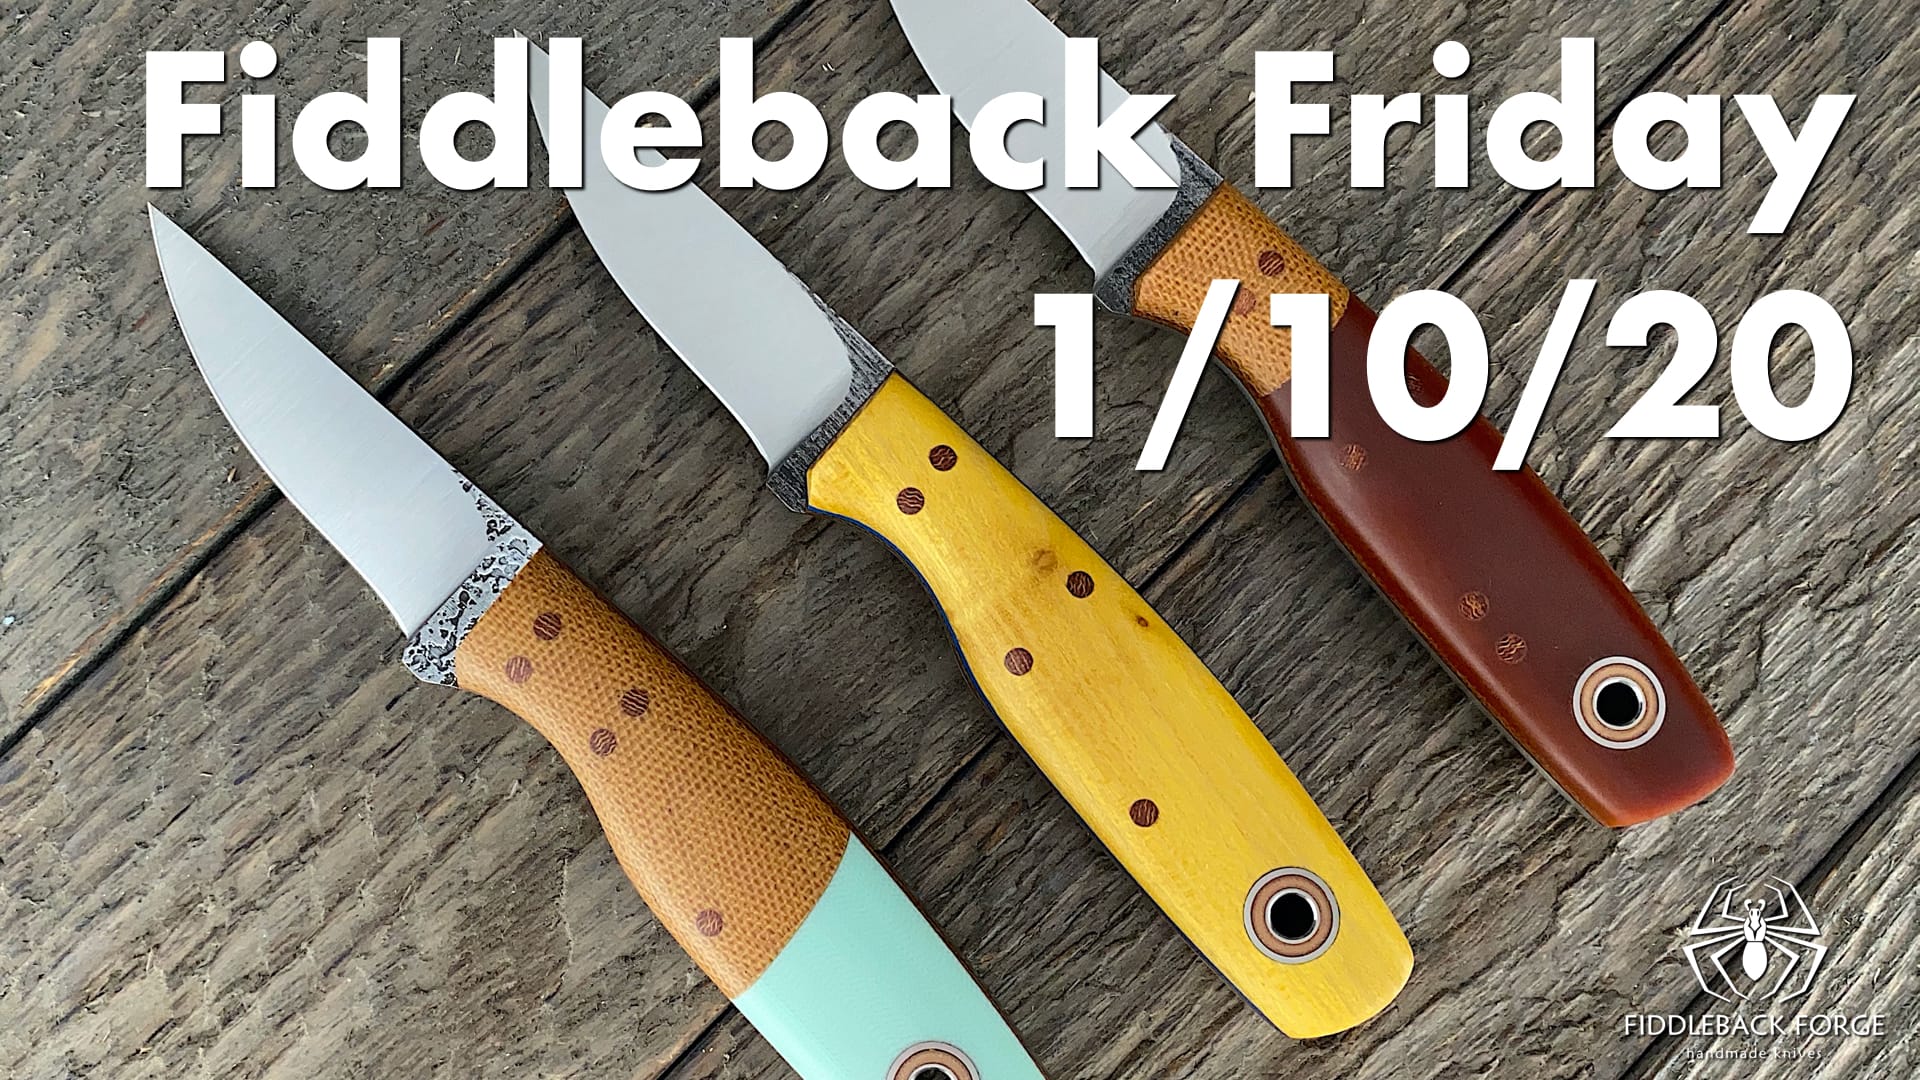 Fiddleback Friday 1/10/20 - Video Preview